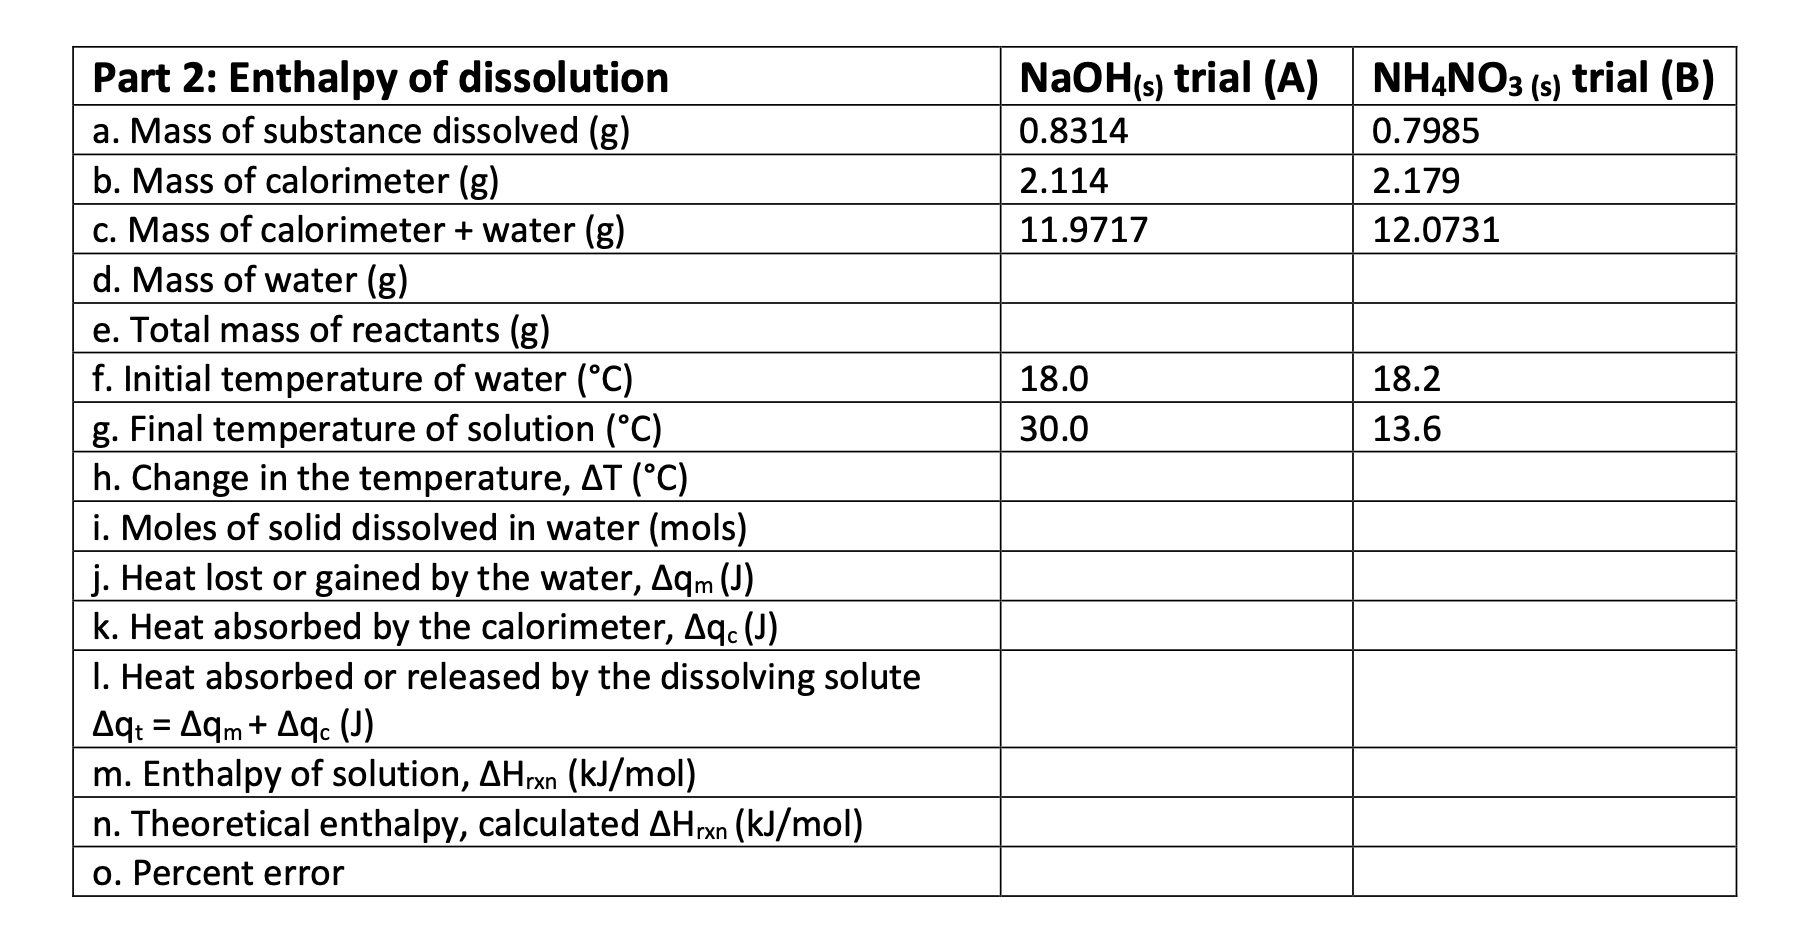 NaOH(s) trial (A) NHẠNO3 (s) trial (B)
Part 2: Enthalpy of dissolution
a. Mass of substance dissolved (g)
b. Mass of calorimeter (g)
c. Mass of calorimeter + water (g)
d. Mass of water (g)
0.8314
0.7985
2.114
2.179
11.9717
12.0731
e. Total mass of reactants (g)
f. Initial temperature of water (°C)
g. Final temperature of solution (°C)
h. Change in the temperature, AT (°C)
i. Moles of solid dissolved in water (mols)
j. Heat lost or gained by the water, Aqm (J)
k. Heat absorbed by the calorimeter, Aq. (J)
I. Heat absorbed or released by the dissolving solute
Aq: = Aqm+ Aqc (J)
m. Enthalpy of solution, AHrxn (kJ/mol)
n. Theoretical enthalpy, calculated AHrxn (kJ/mol)
18.0
18.2
30.0
13.6
o. Percent error
